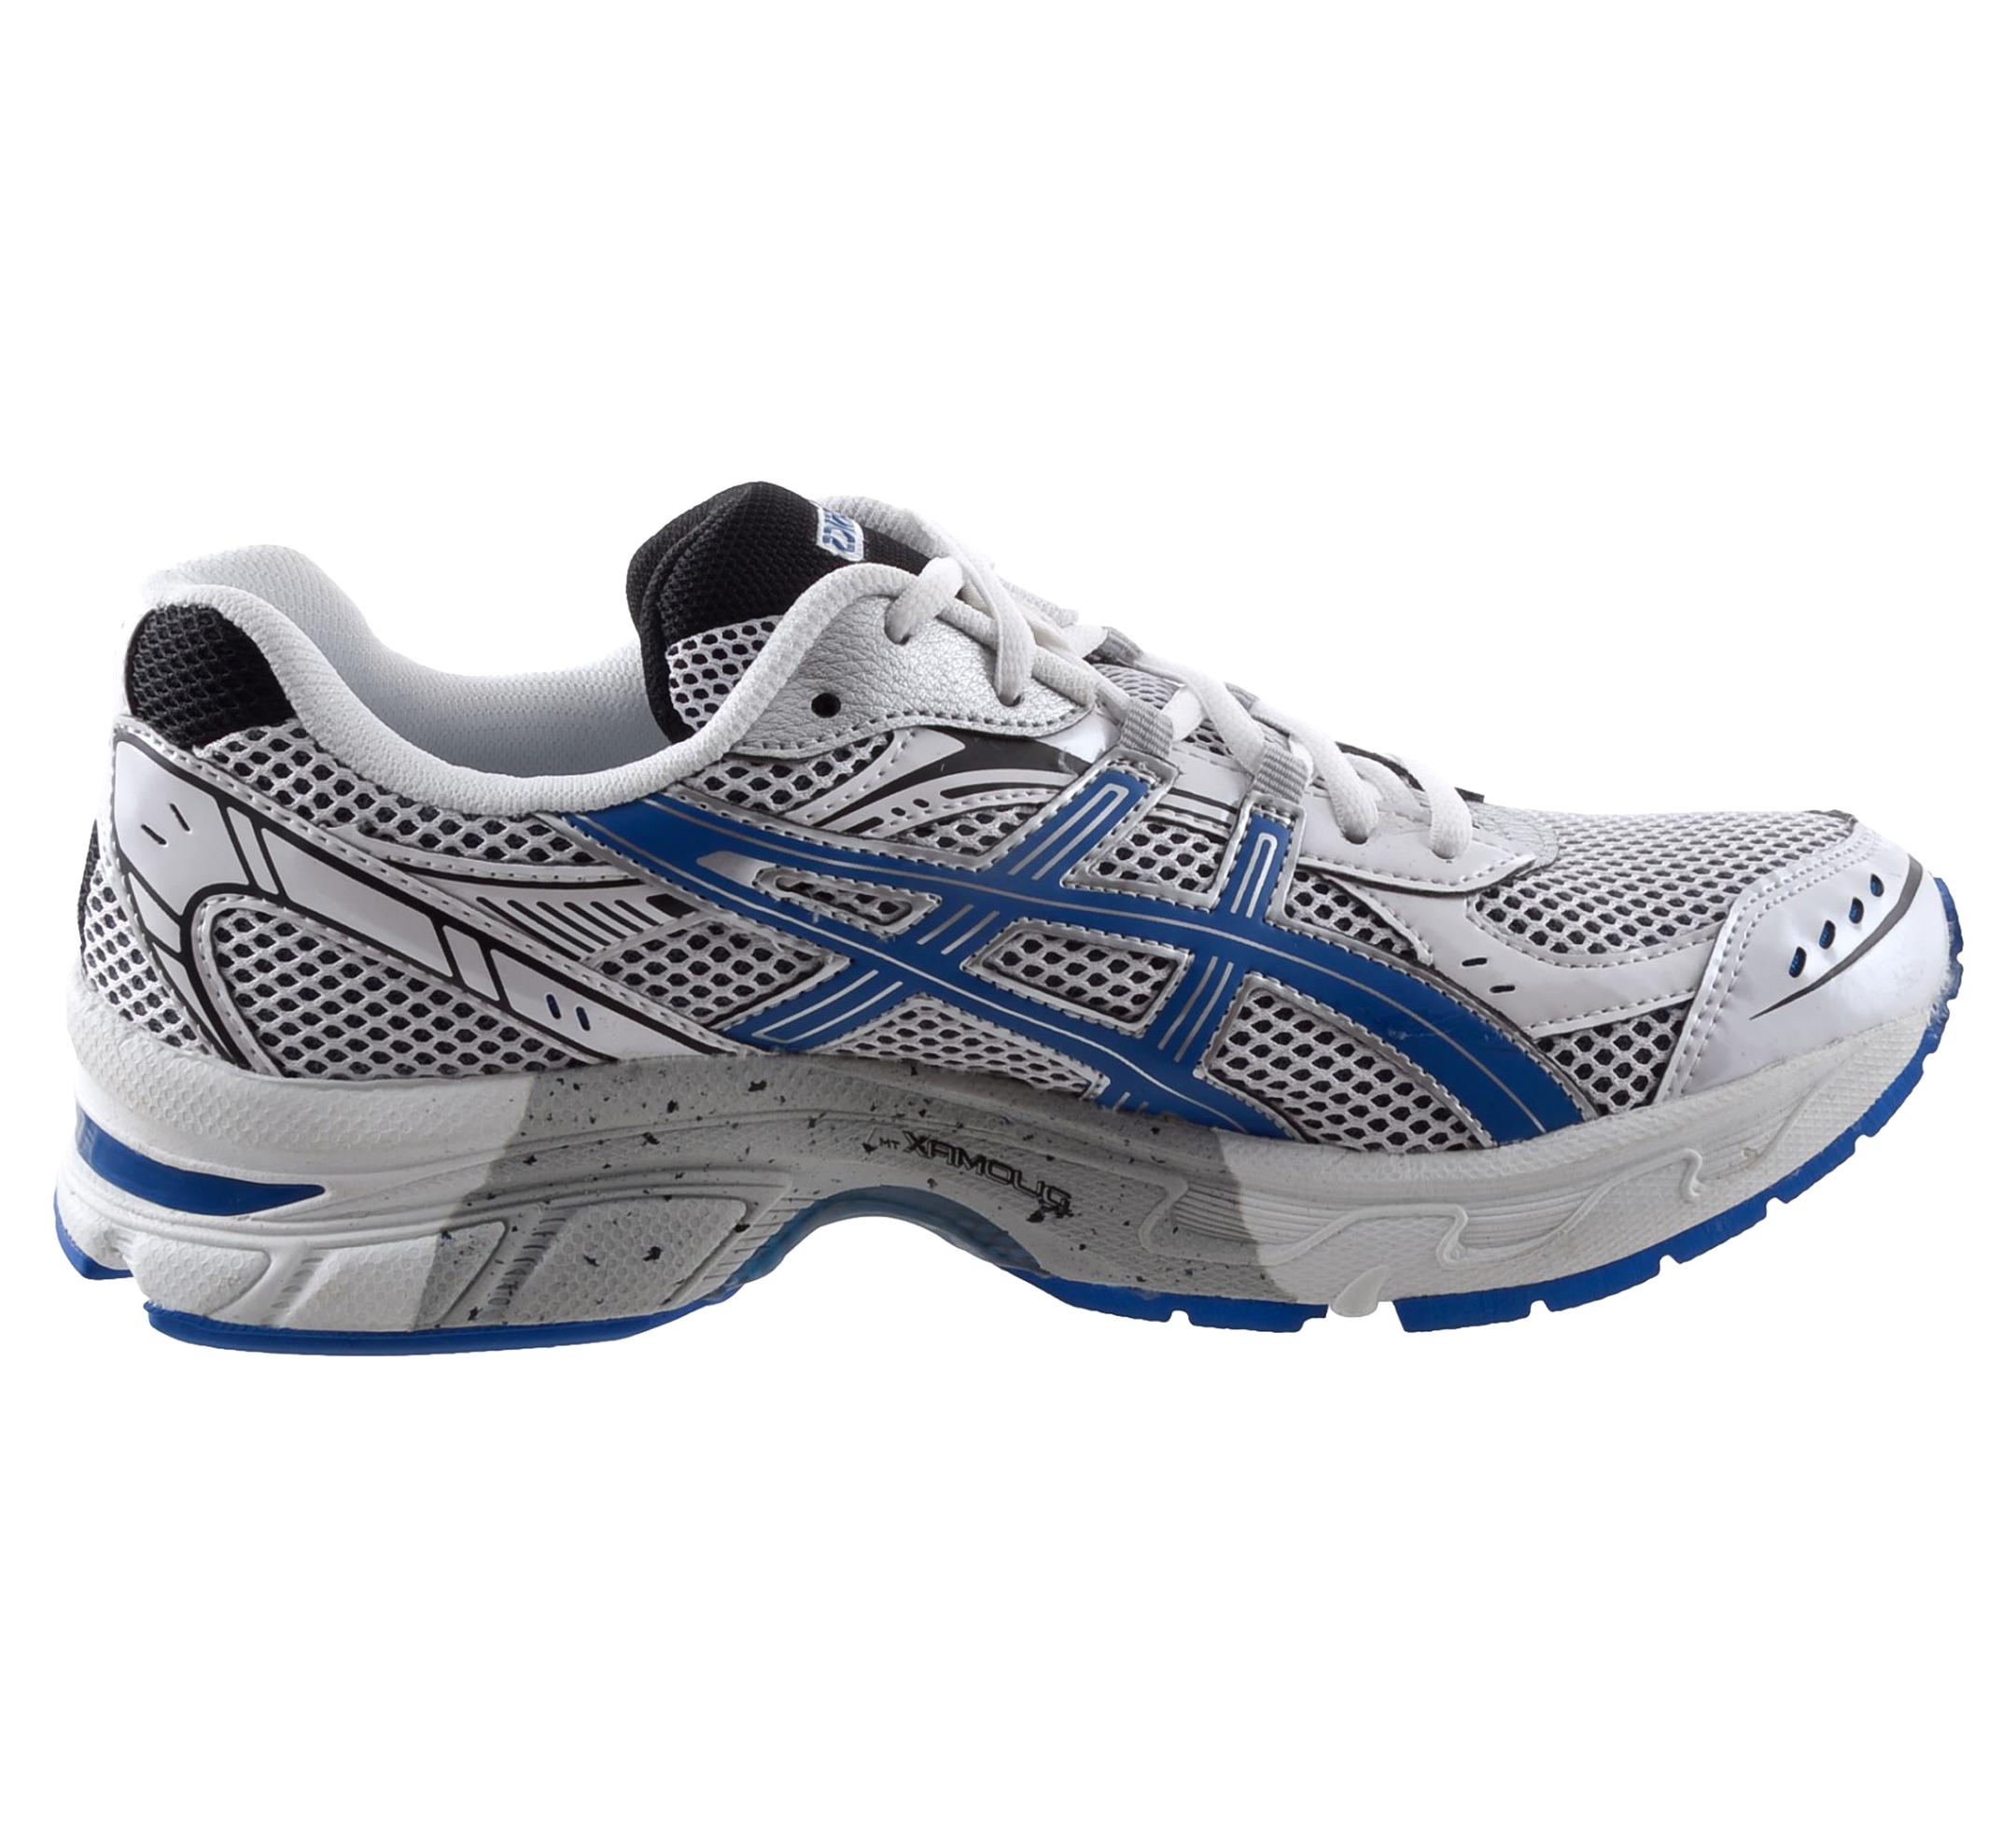 asics duo max trainers